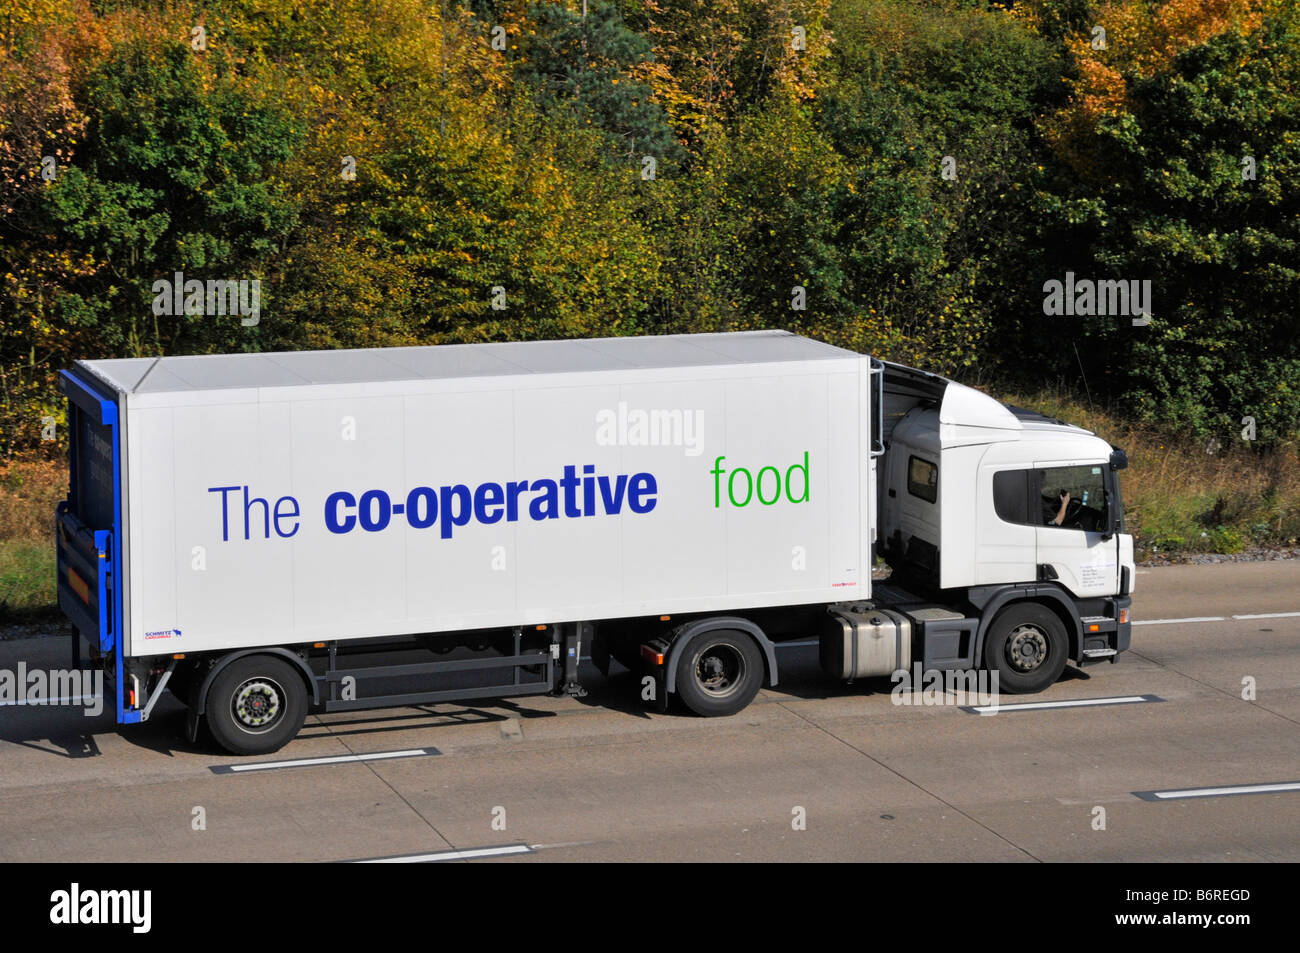 Co op food supply chain articulated delivery trailer & hgv lorry truck used for food distribution to co operative supermarket stores Essex England UK Stock Photo